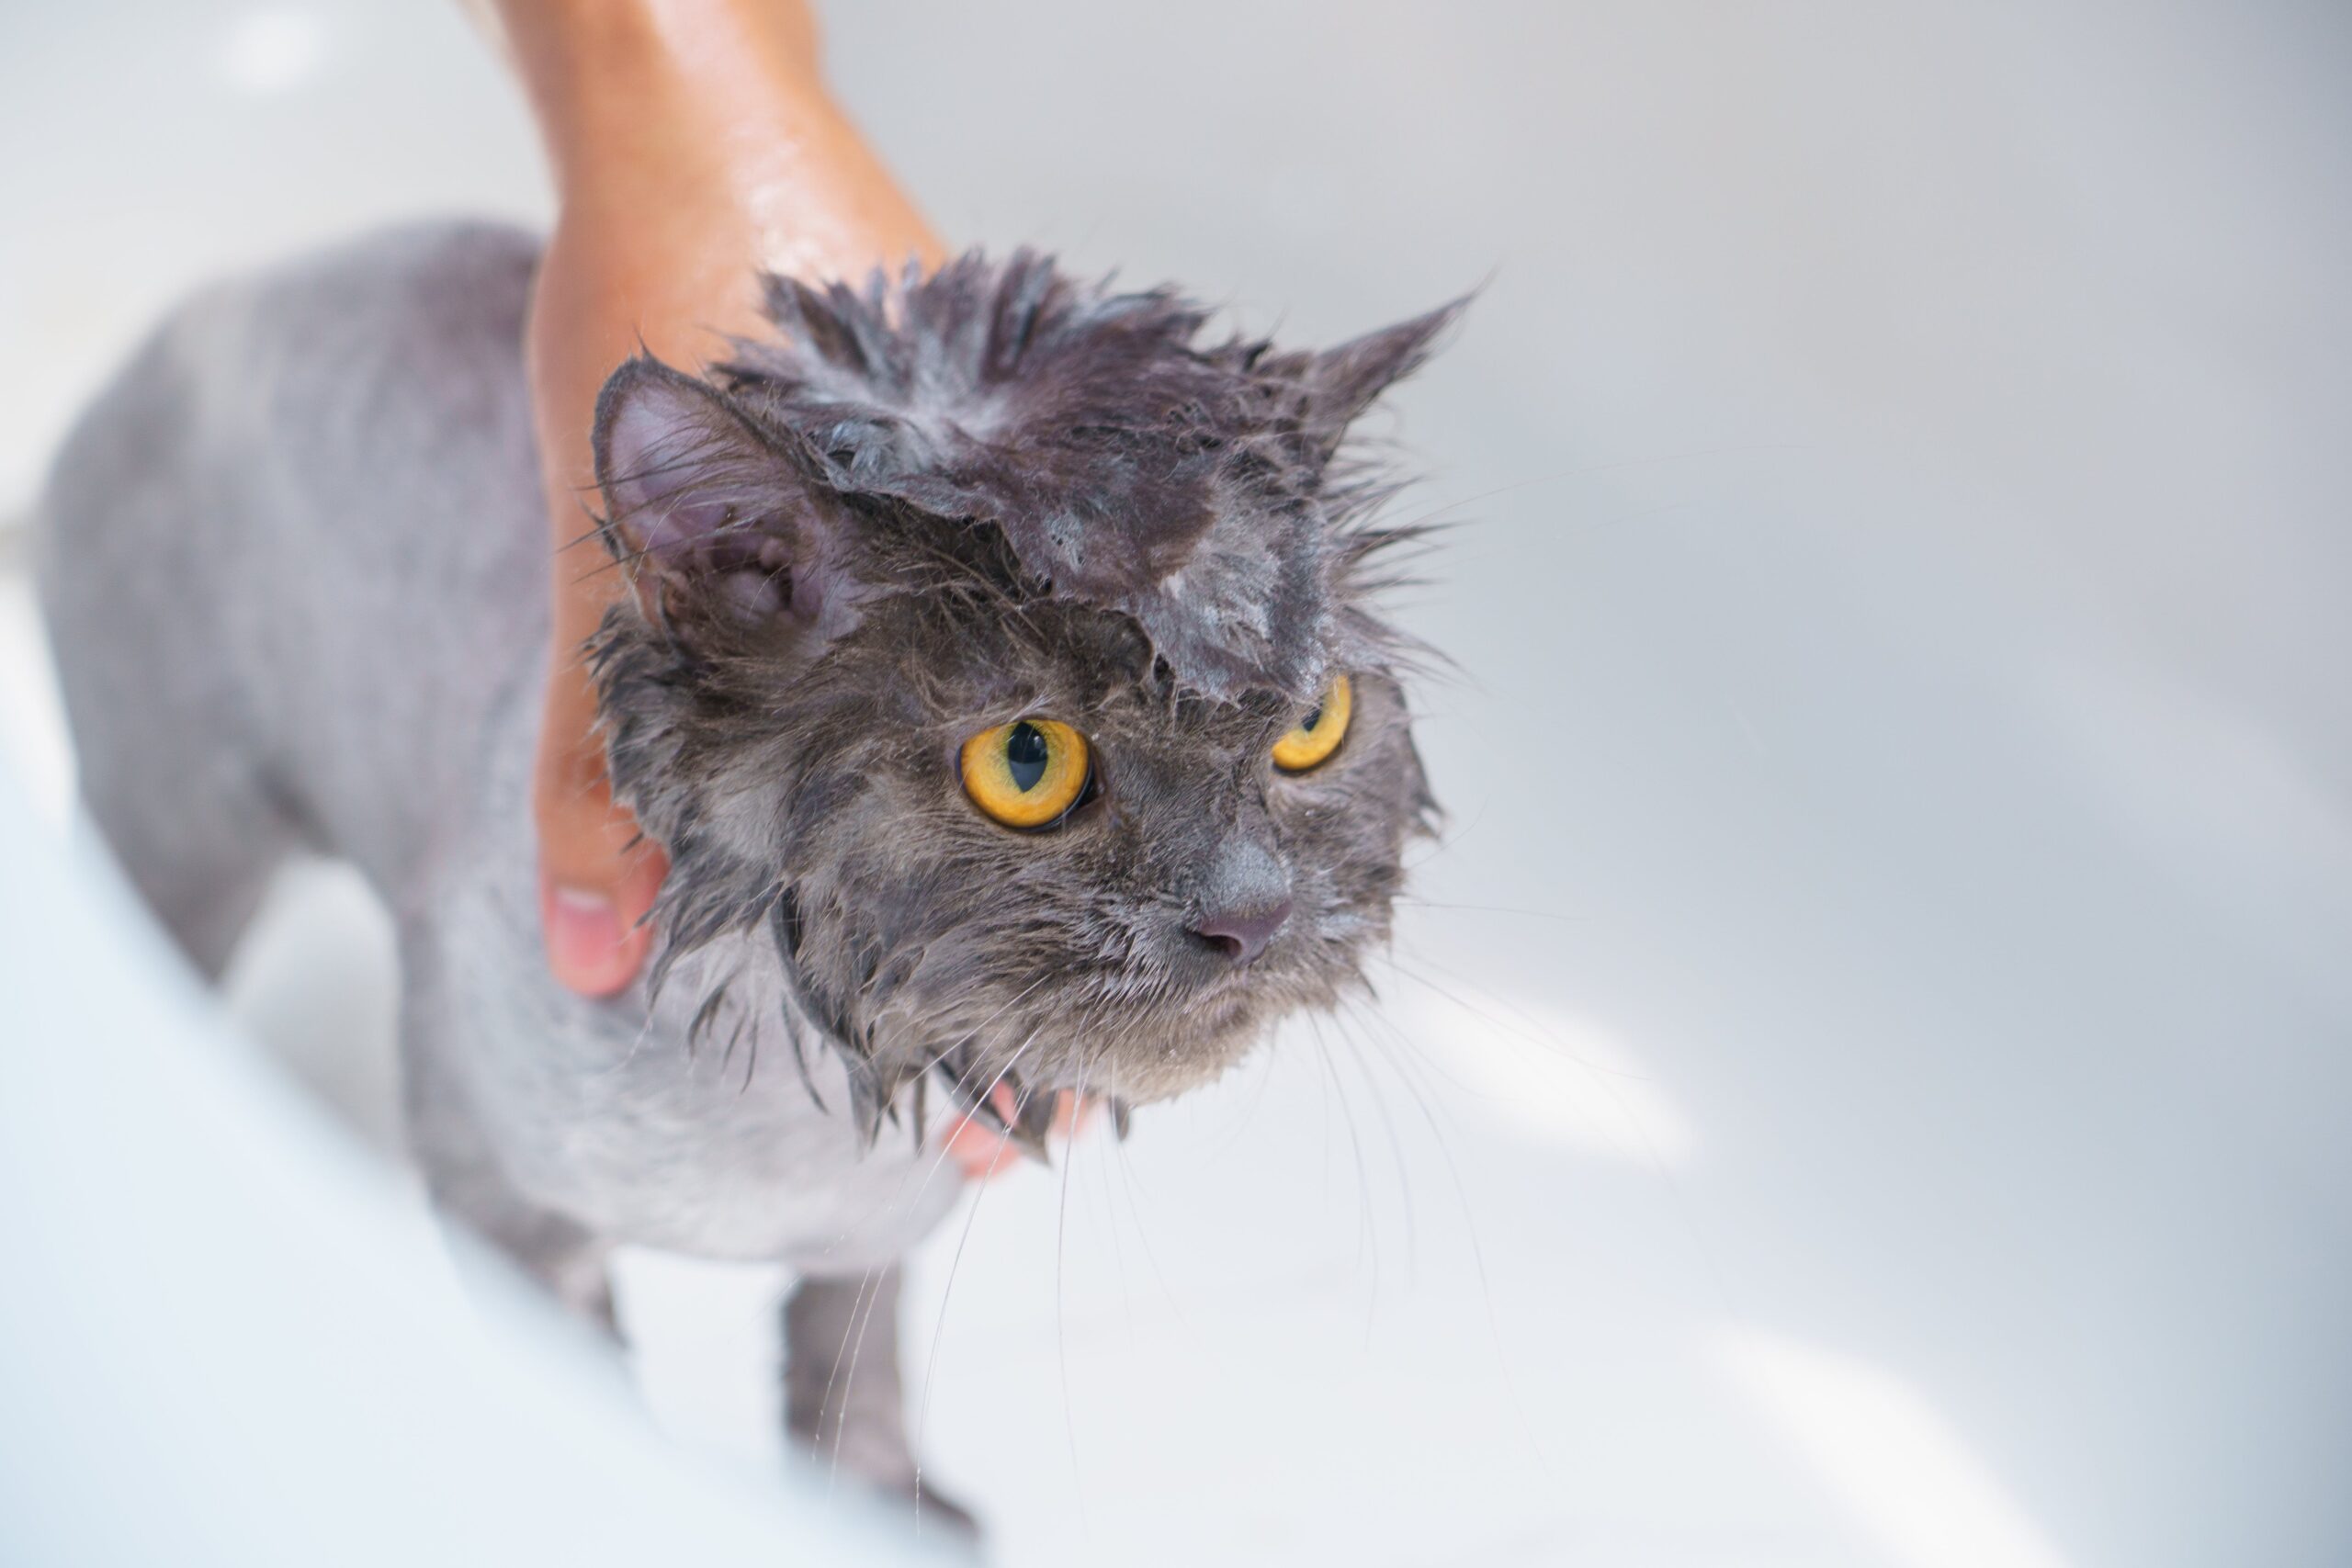 Cat Bathing and Hygiene